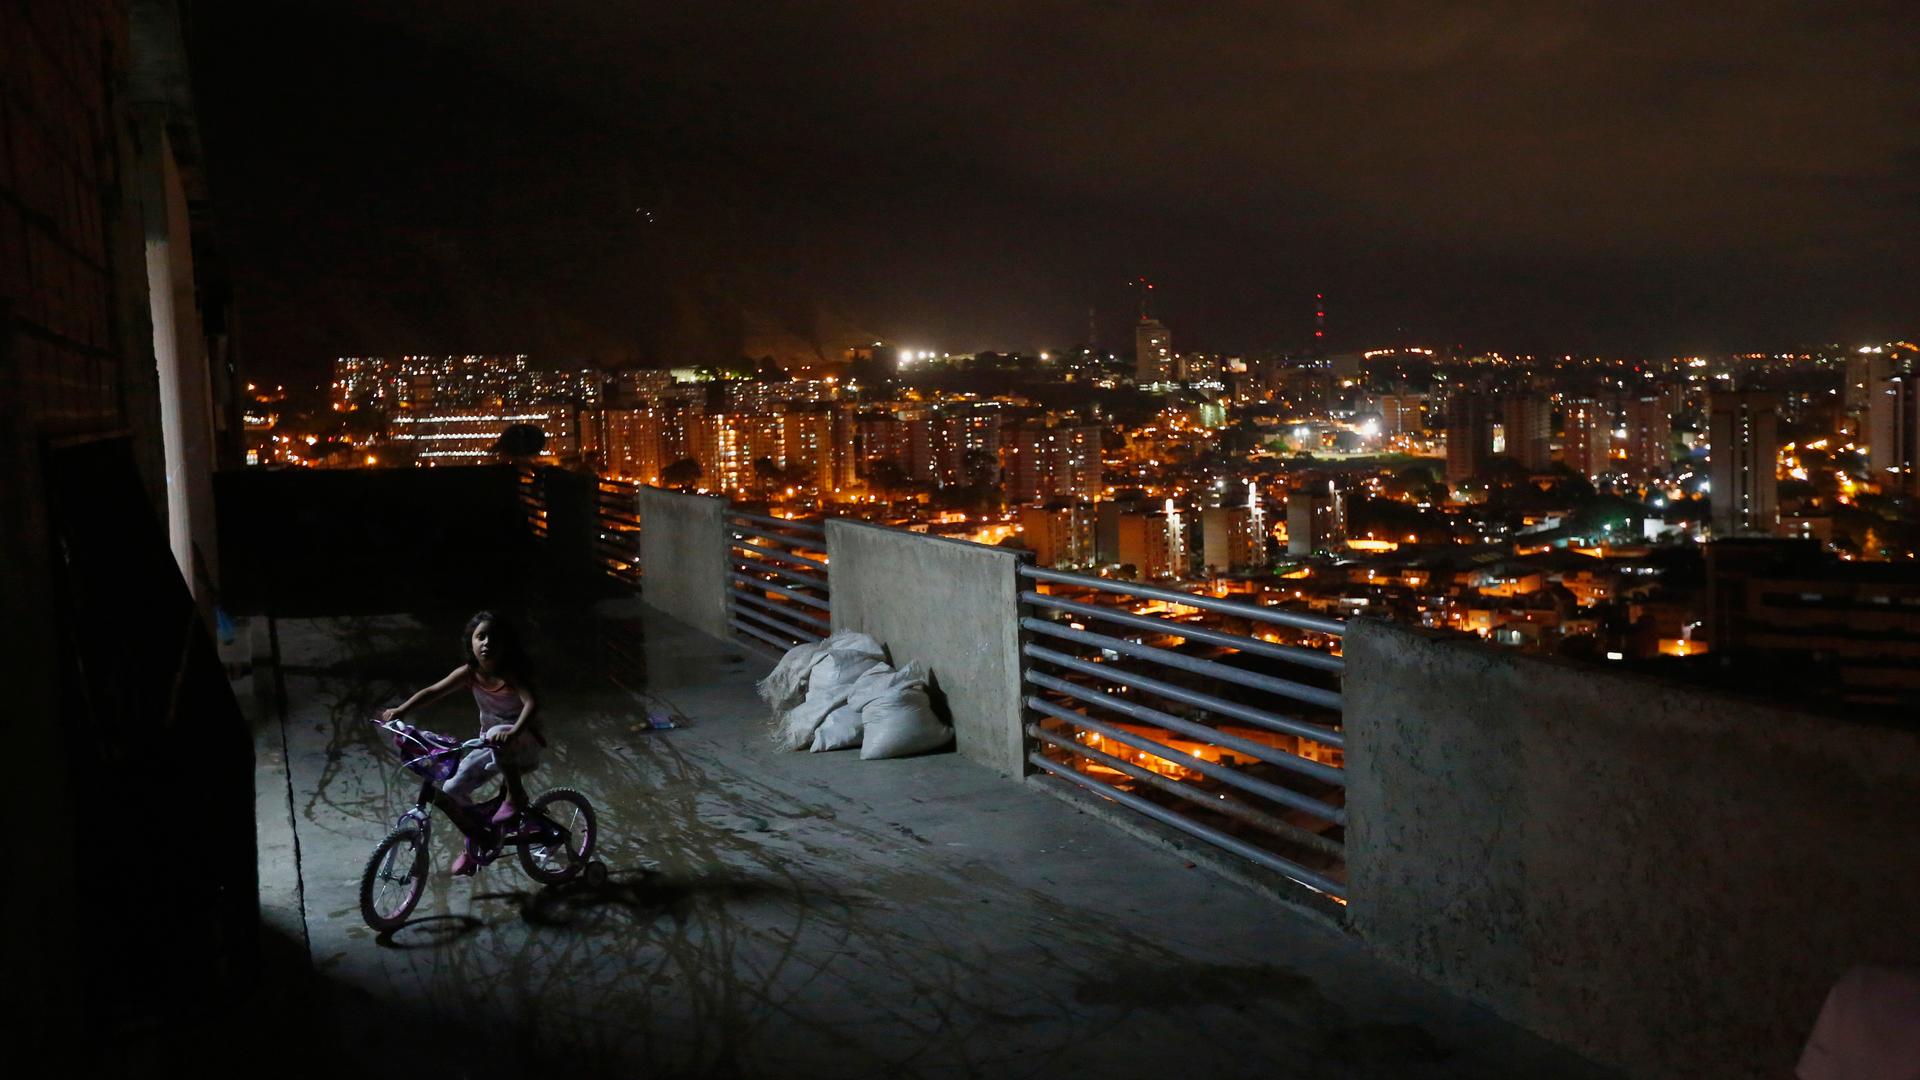 A girl rides a bicycle on a balcony in the "Tower of David" skyscraper.